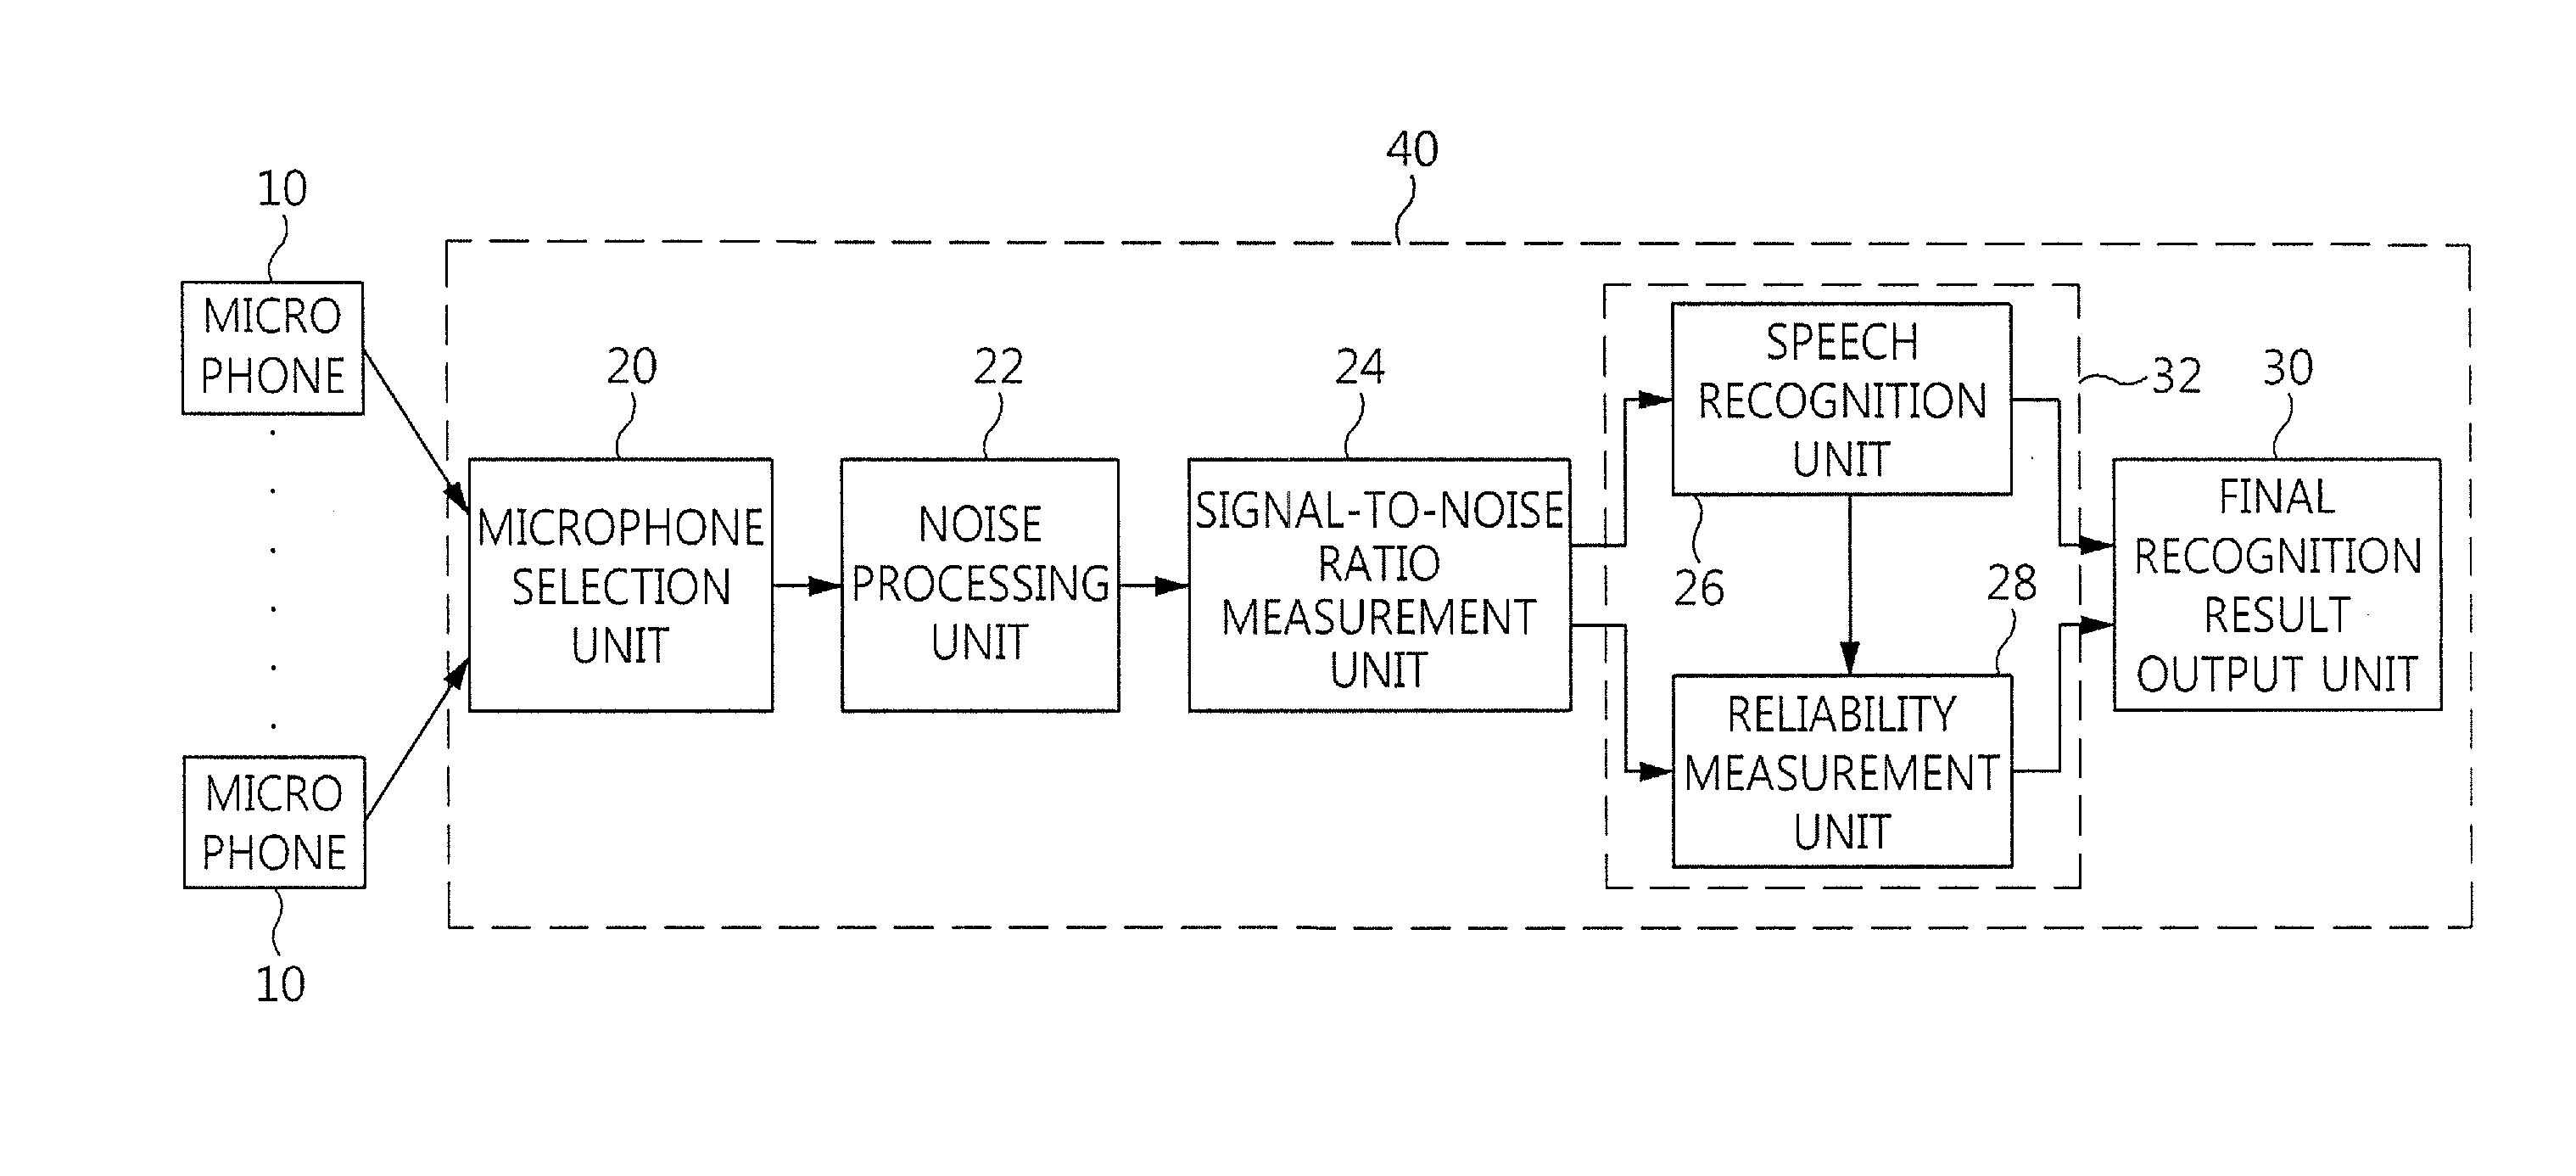 Apparatus and method for performing asynchronous speech recognition using multiple microphones